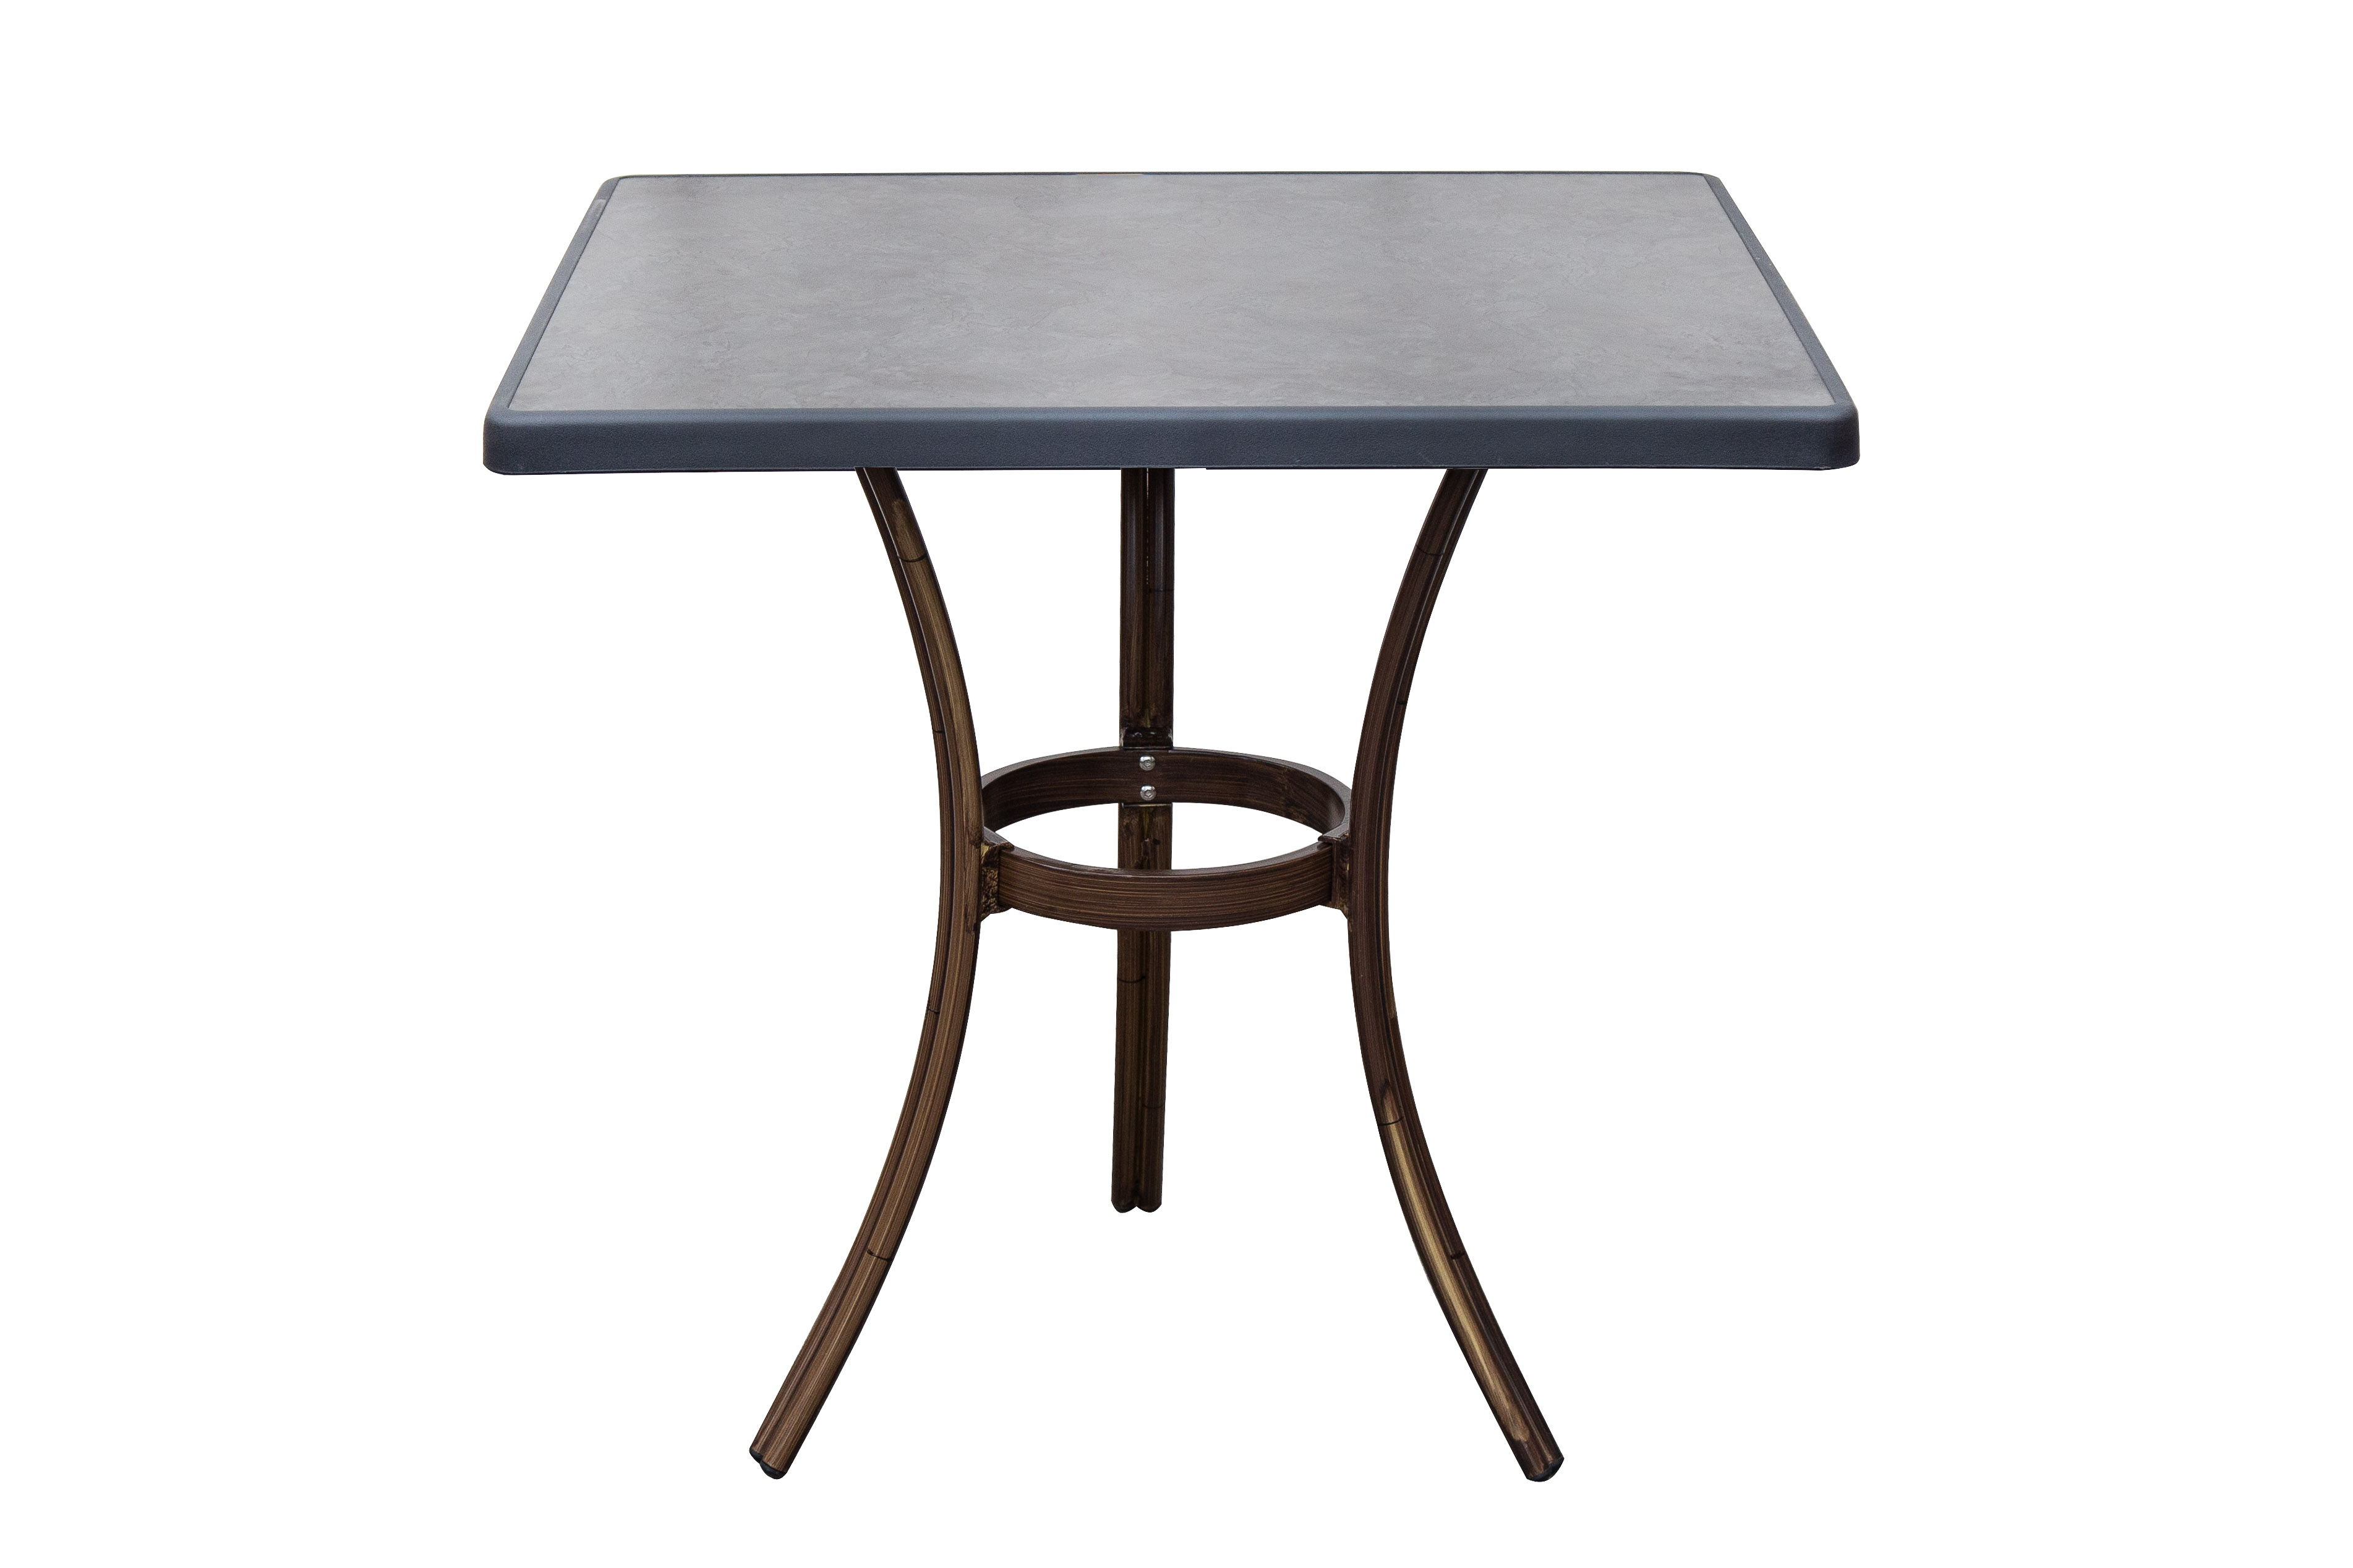 RESTAURANT TABLE & BASE GREY MARBLE SQUARE OR ROUND MODEL 6534